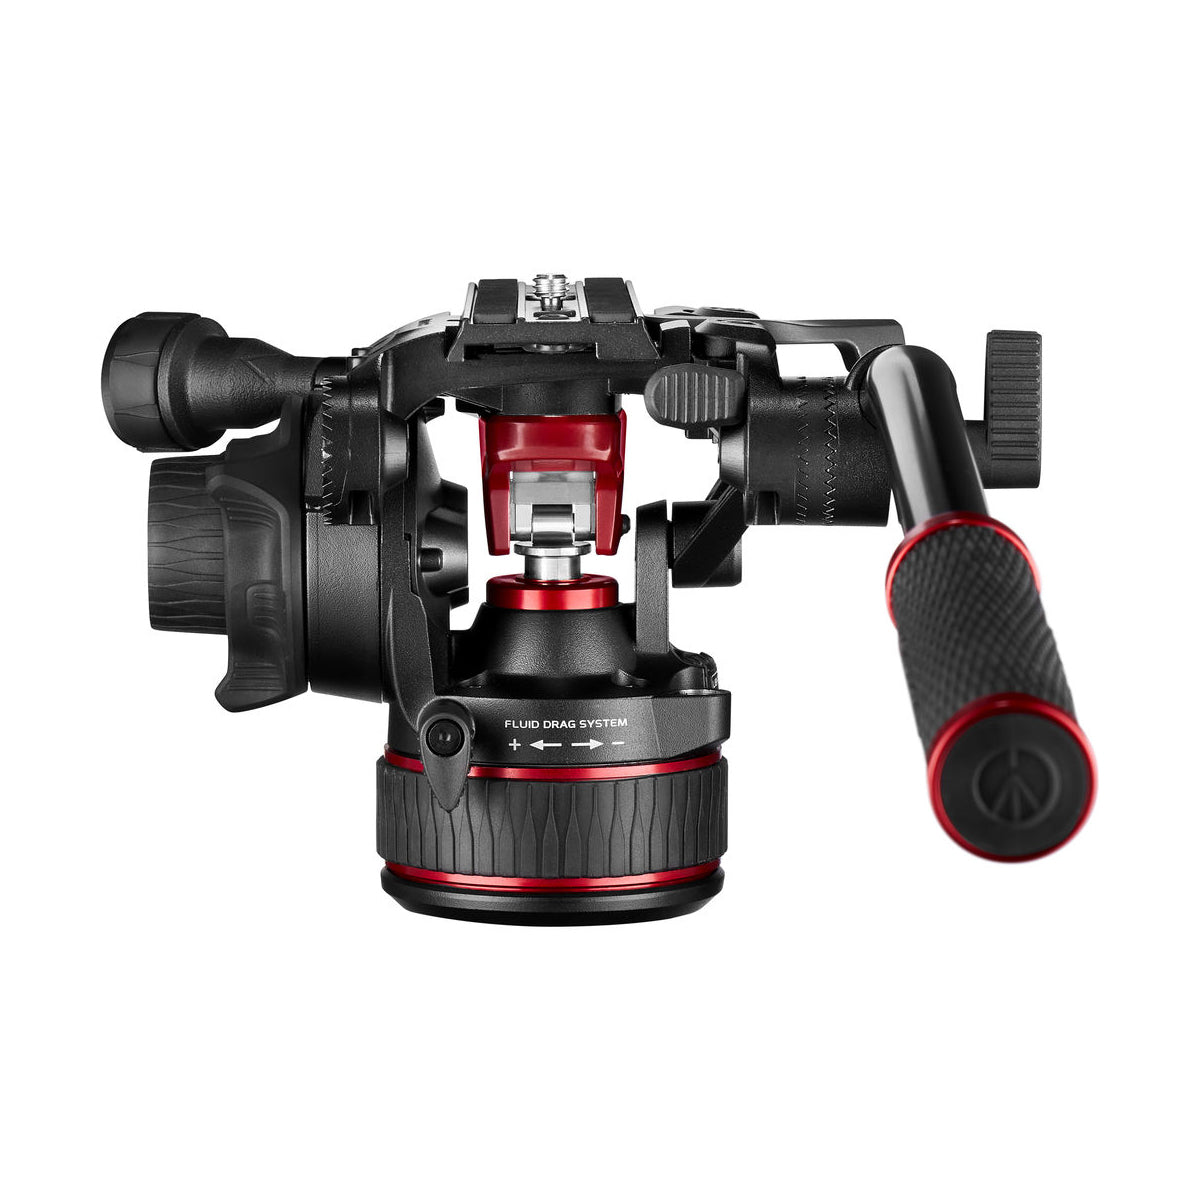 Manfrotto MVK612TWINFAUS Kit with Nitrotech 612 Fluid Head and 645 Fast Twin Leg Aluminum Tripod & Bag